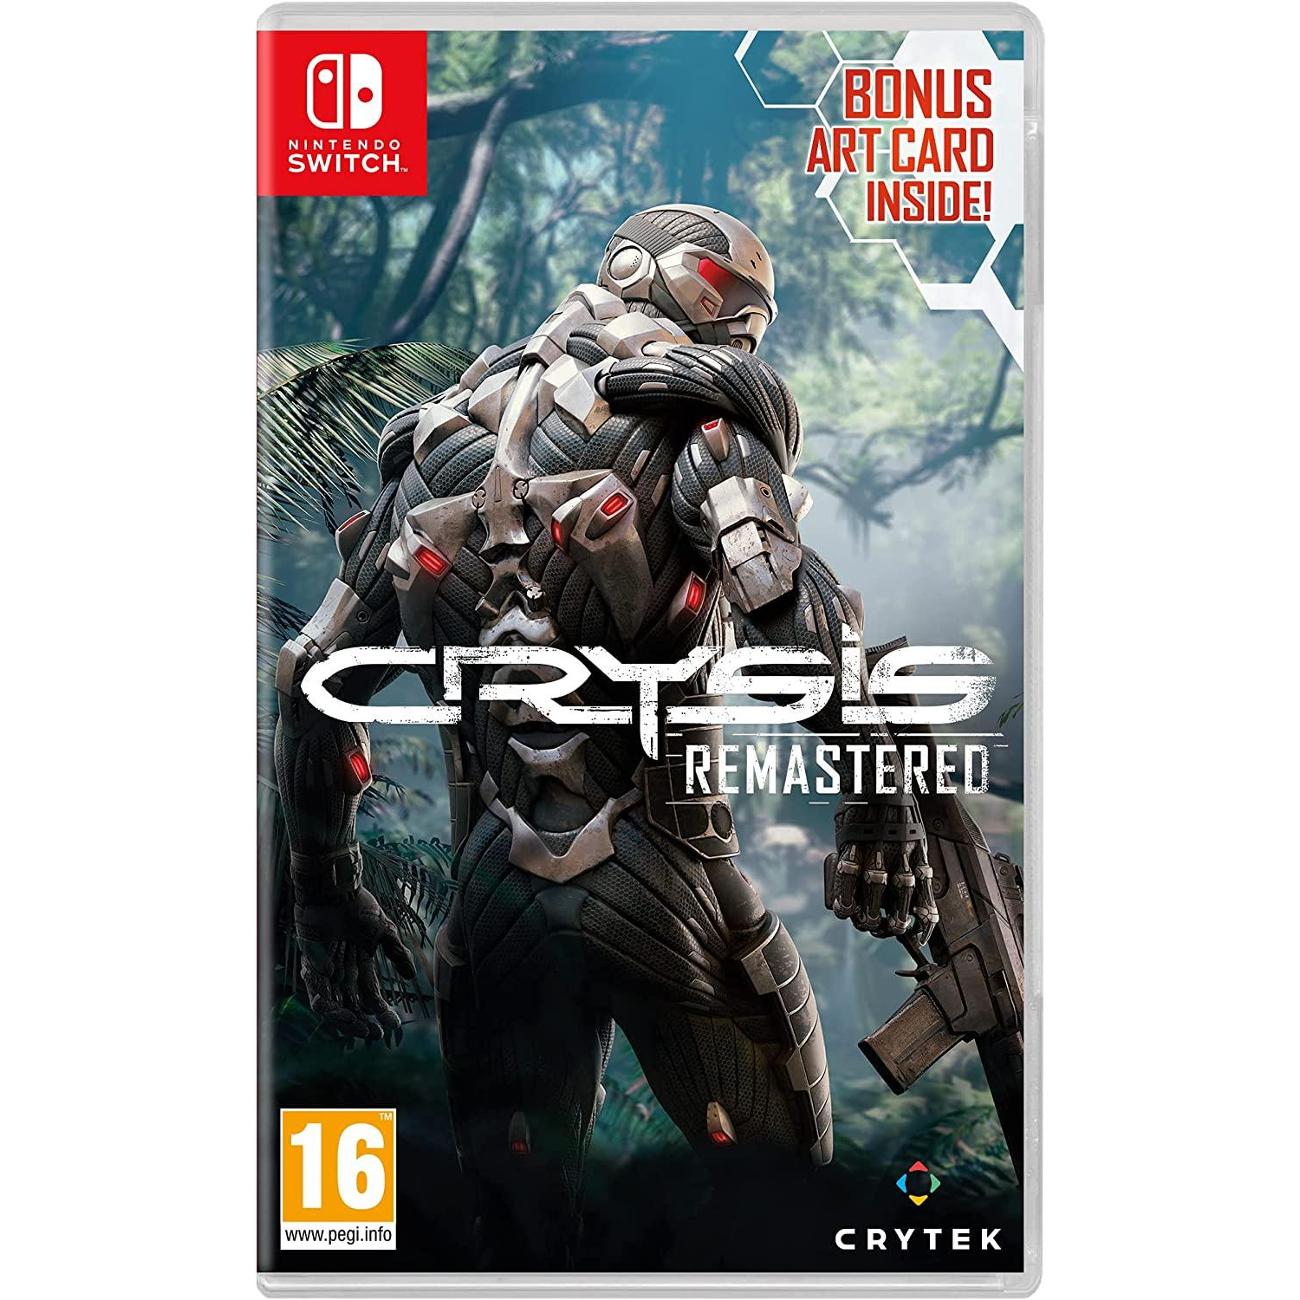 Crysis 3 not on steam фото 27